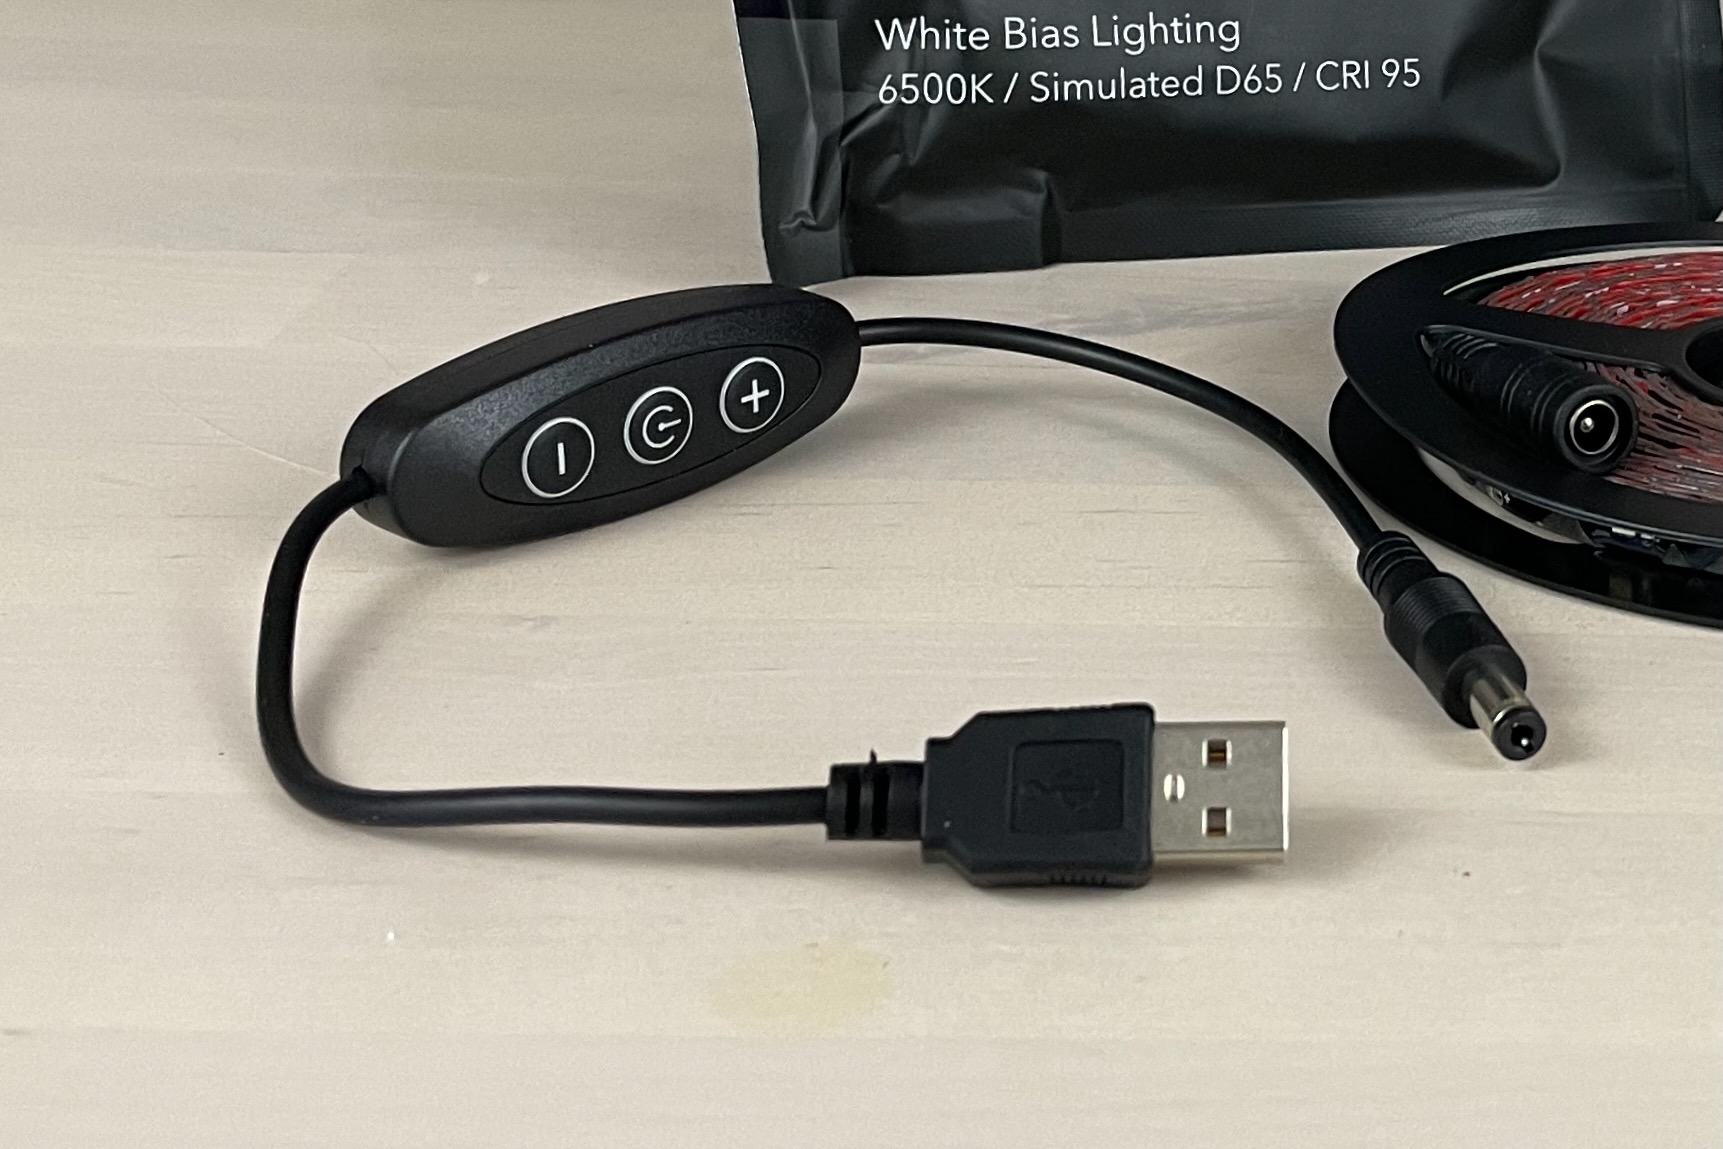 Scenic Labs LX1 bias lighting review: An easy TV upgrade | TechHive